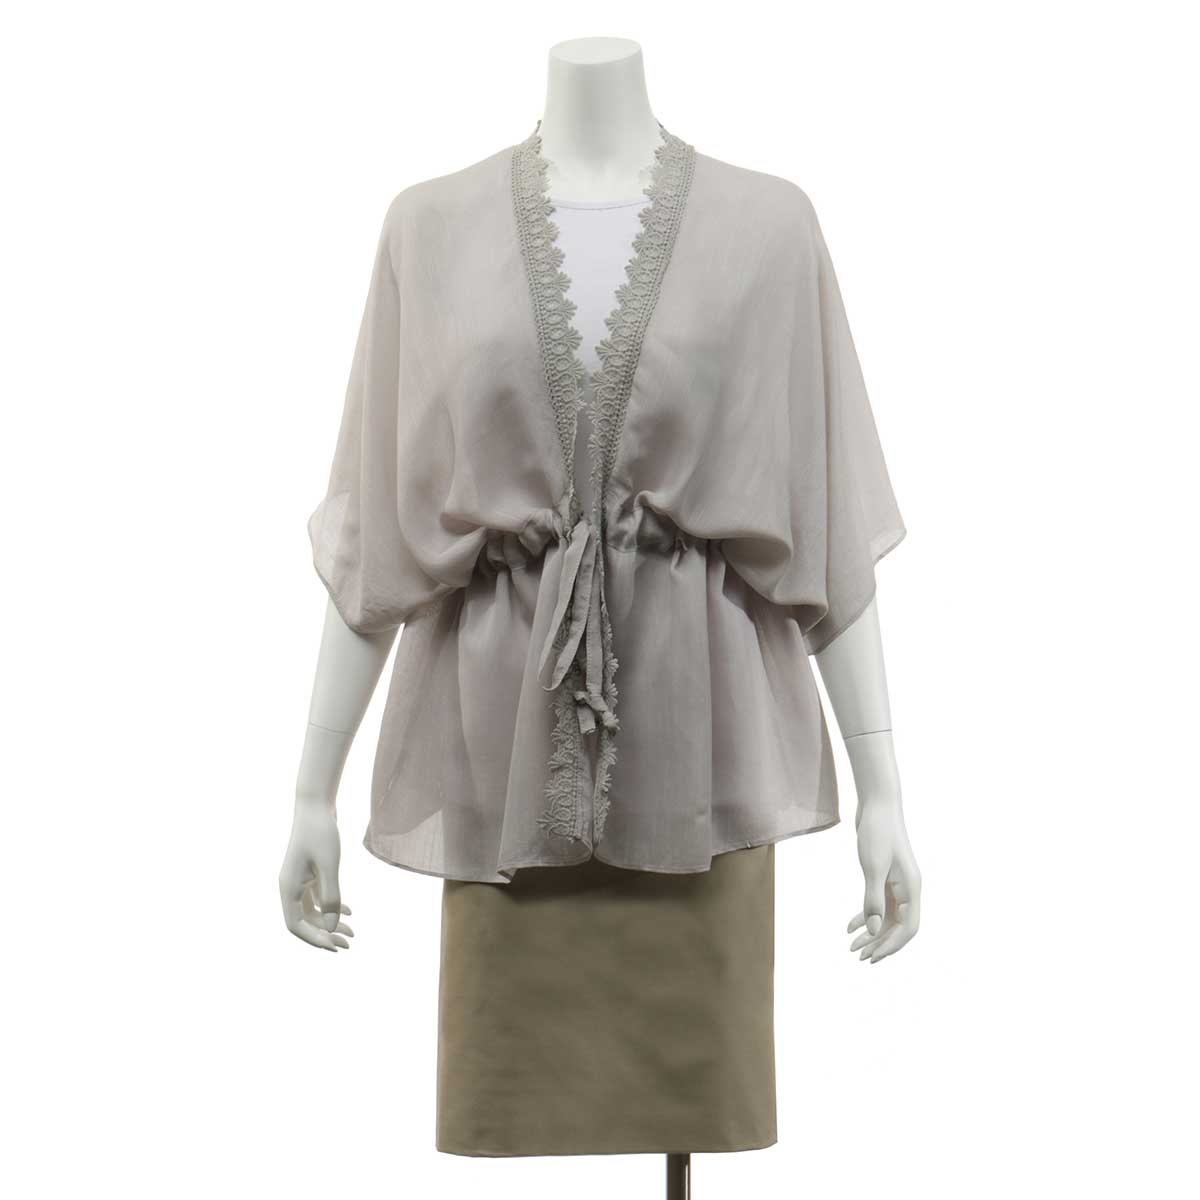 Grey Tunic with Lace and Adjustable Tie 36"x26" 50sp